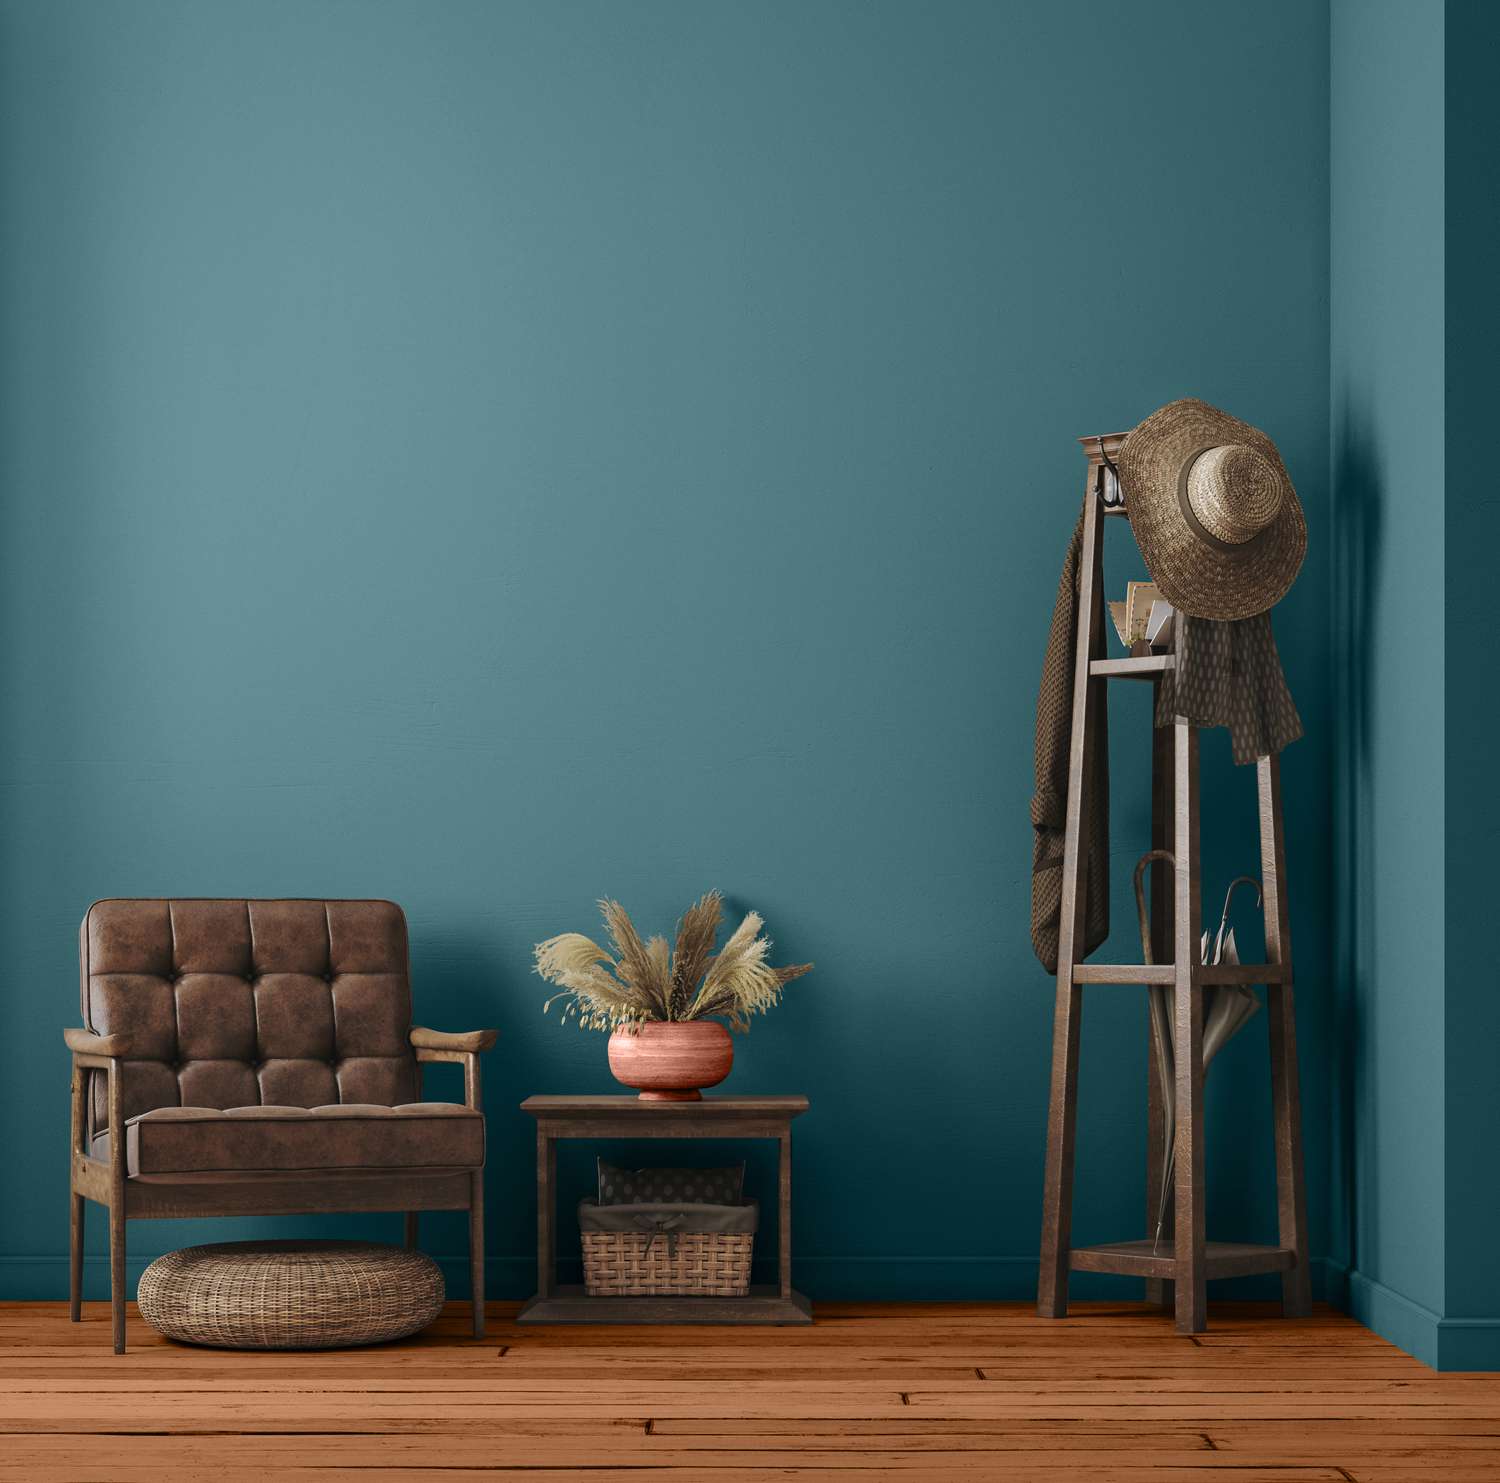 Glidden's 2023 Color of the Year is Vining Ivy